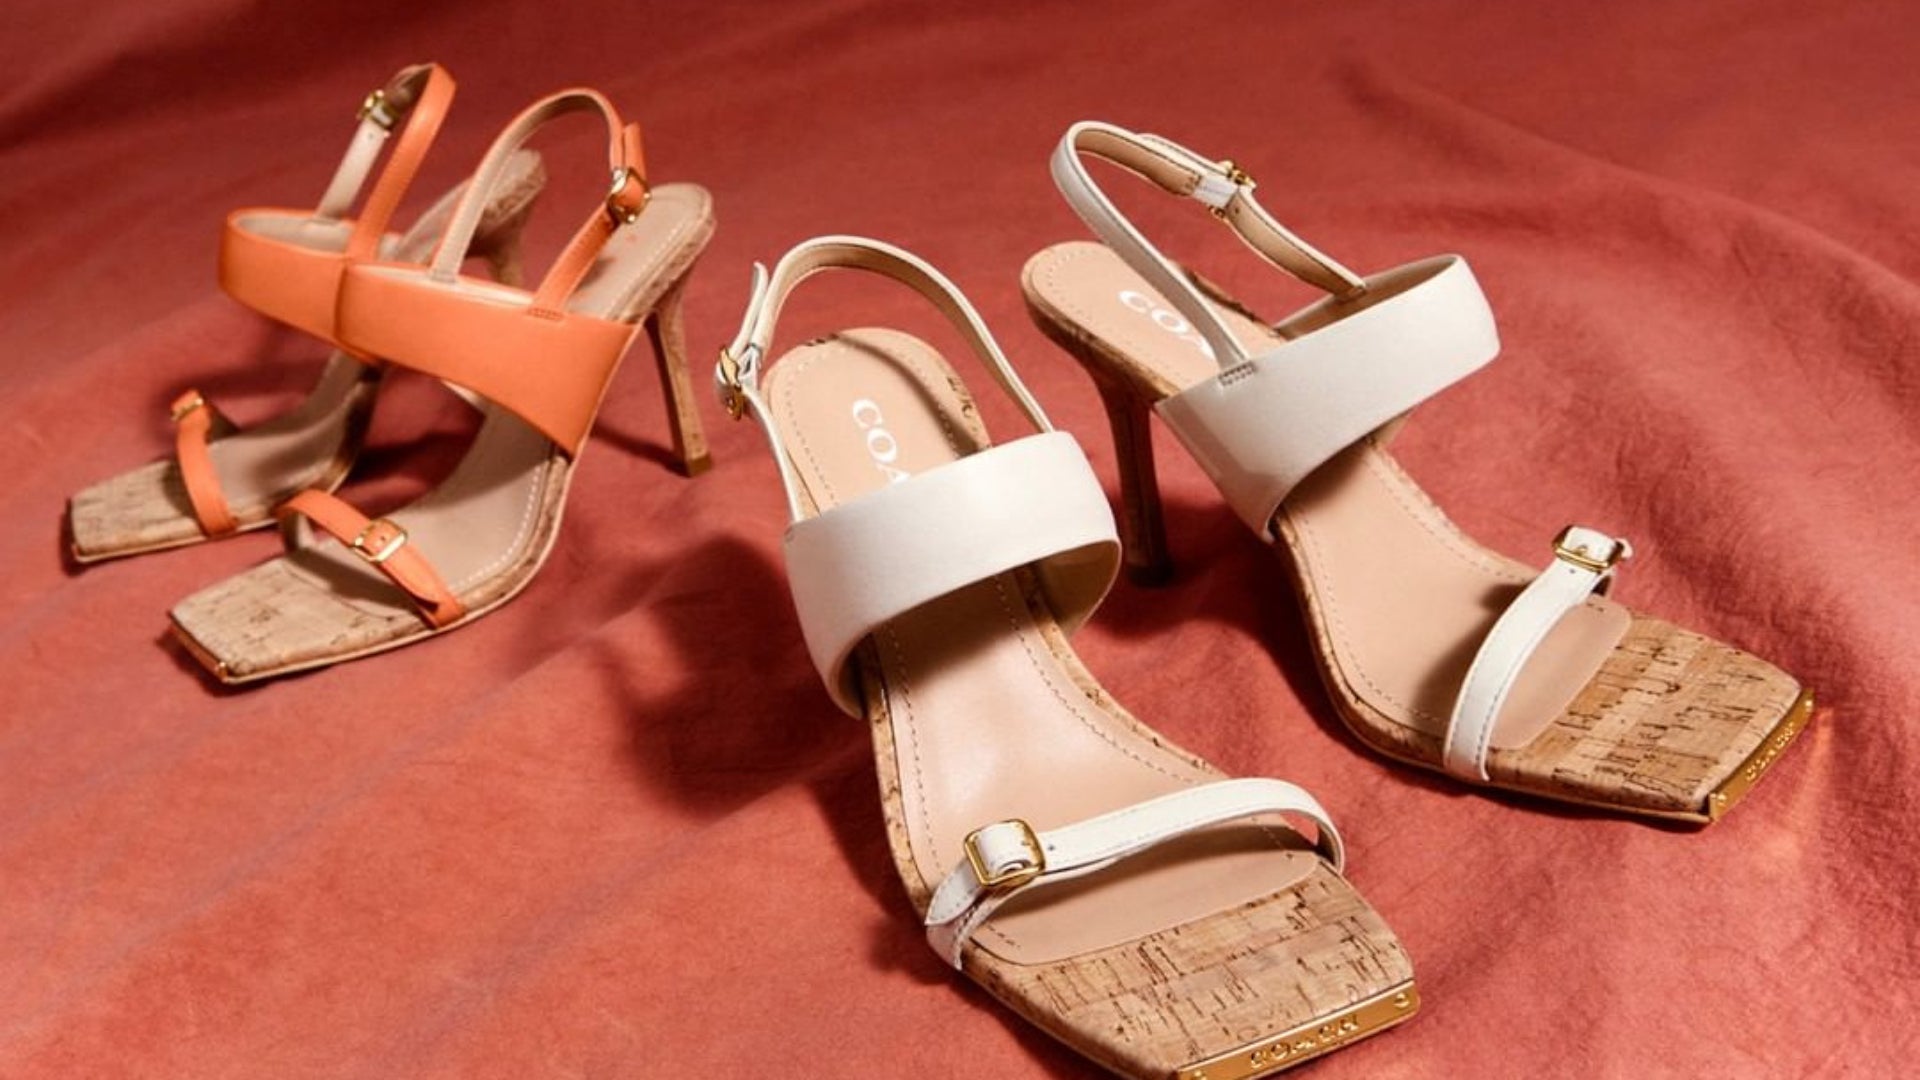 Coach’s Sale Includes The Spring Handbags And Shoes Your Closet Needs